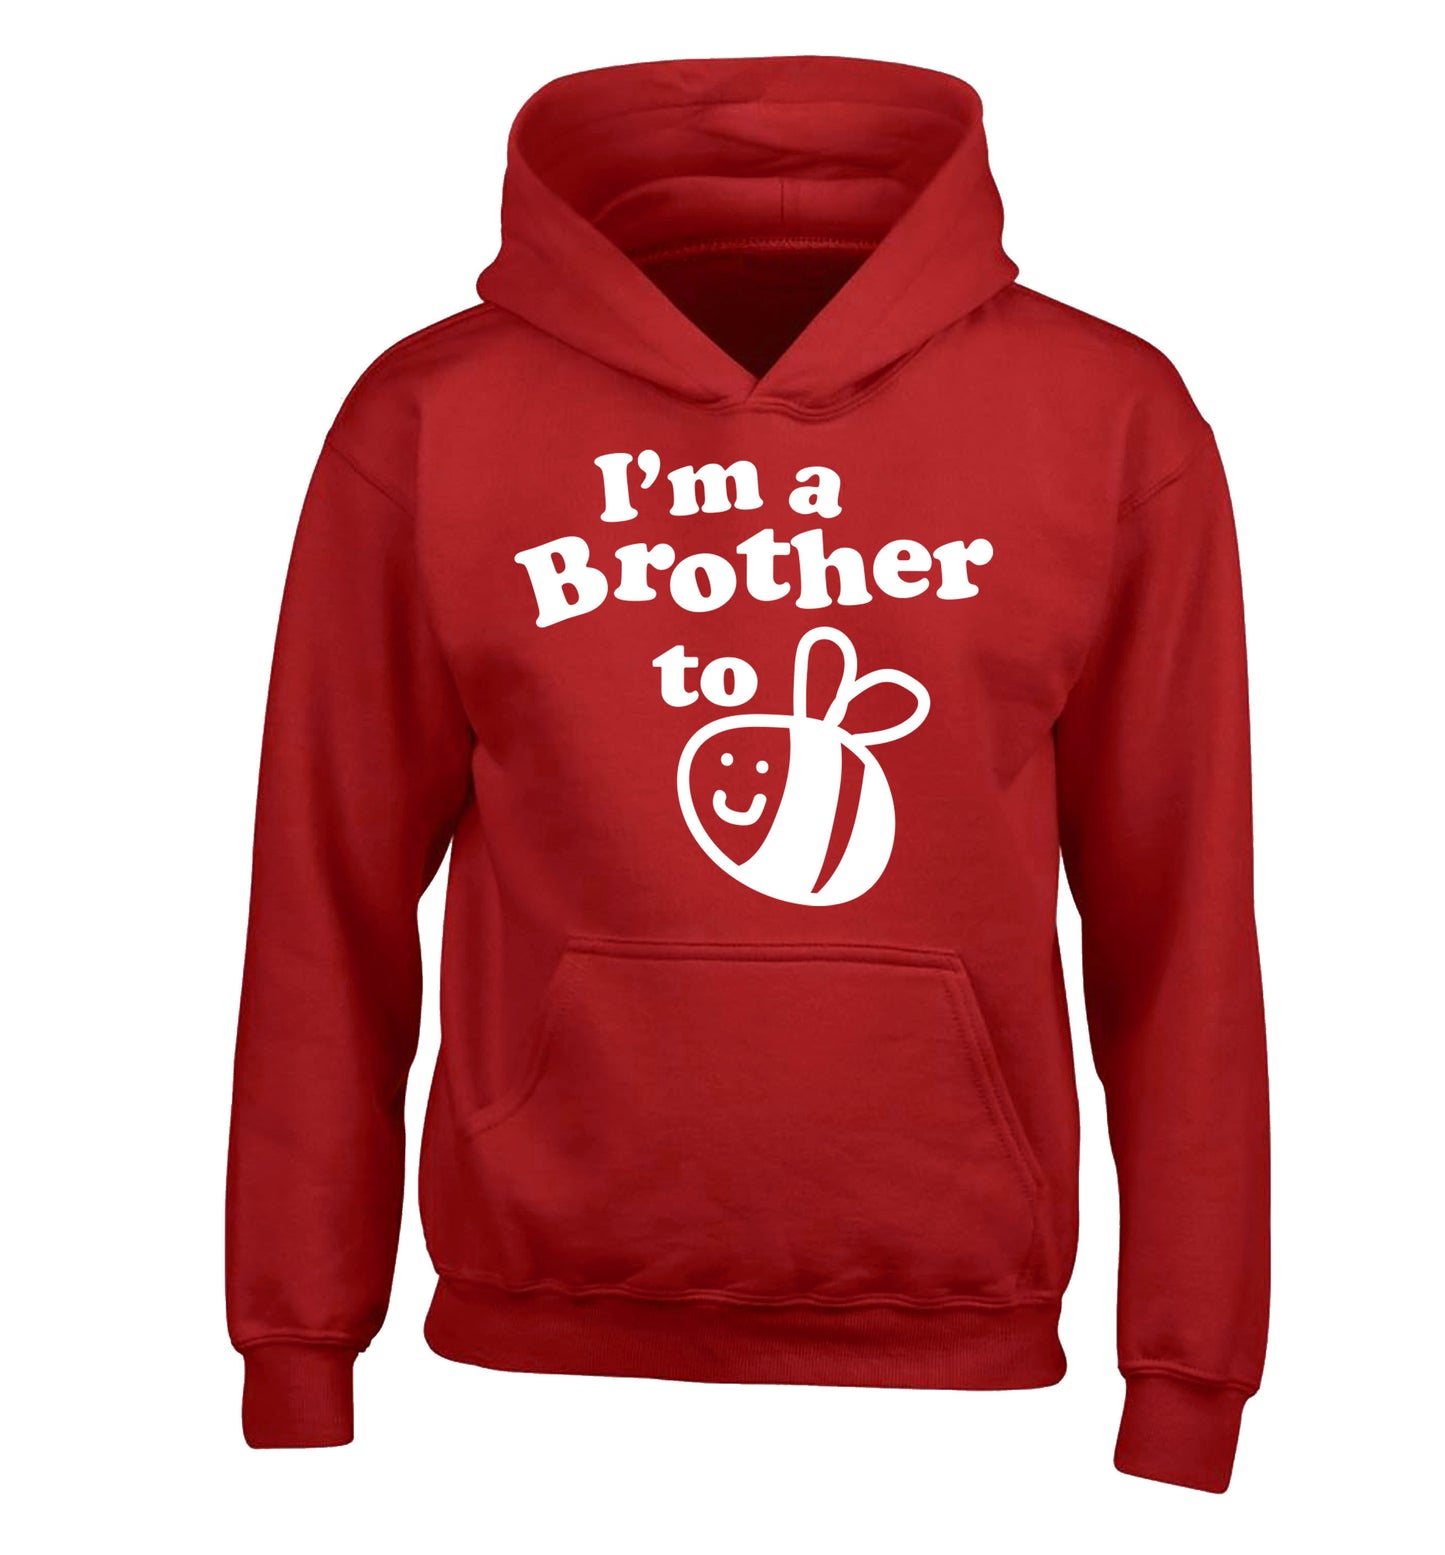 I'm a brother to be children's red hoodie 12-14 Years